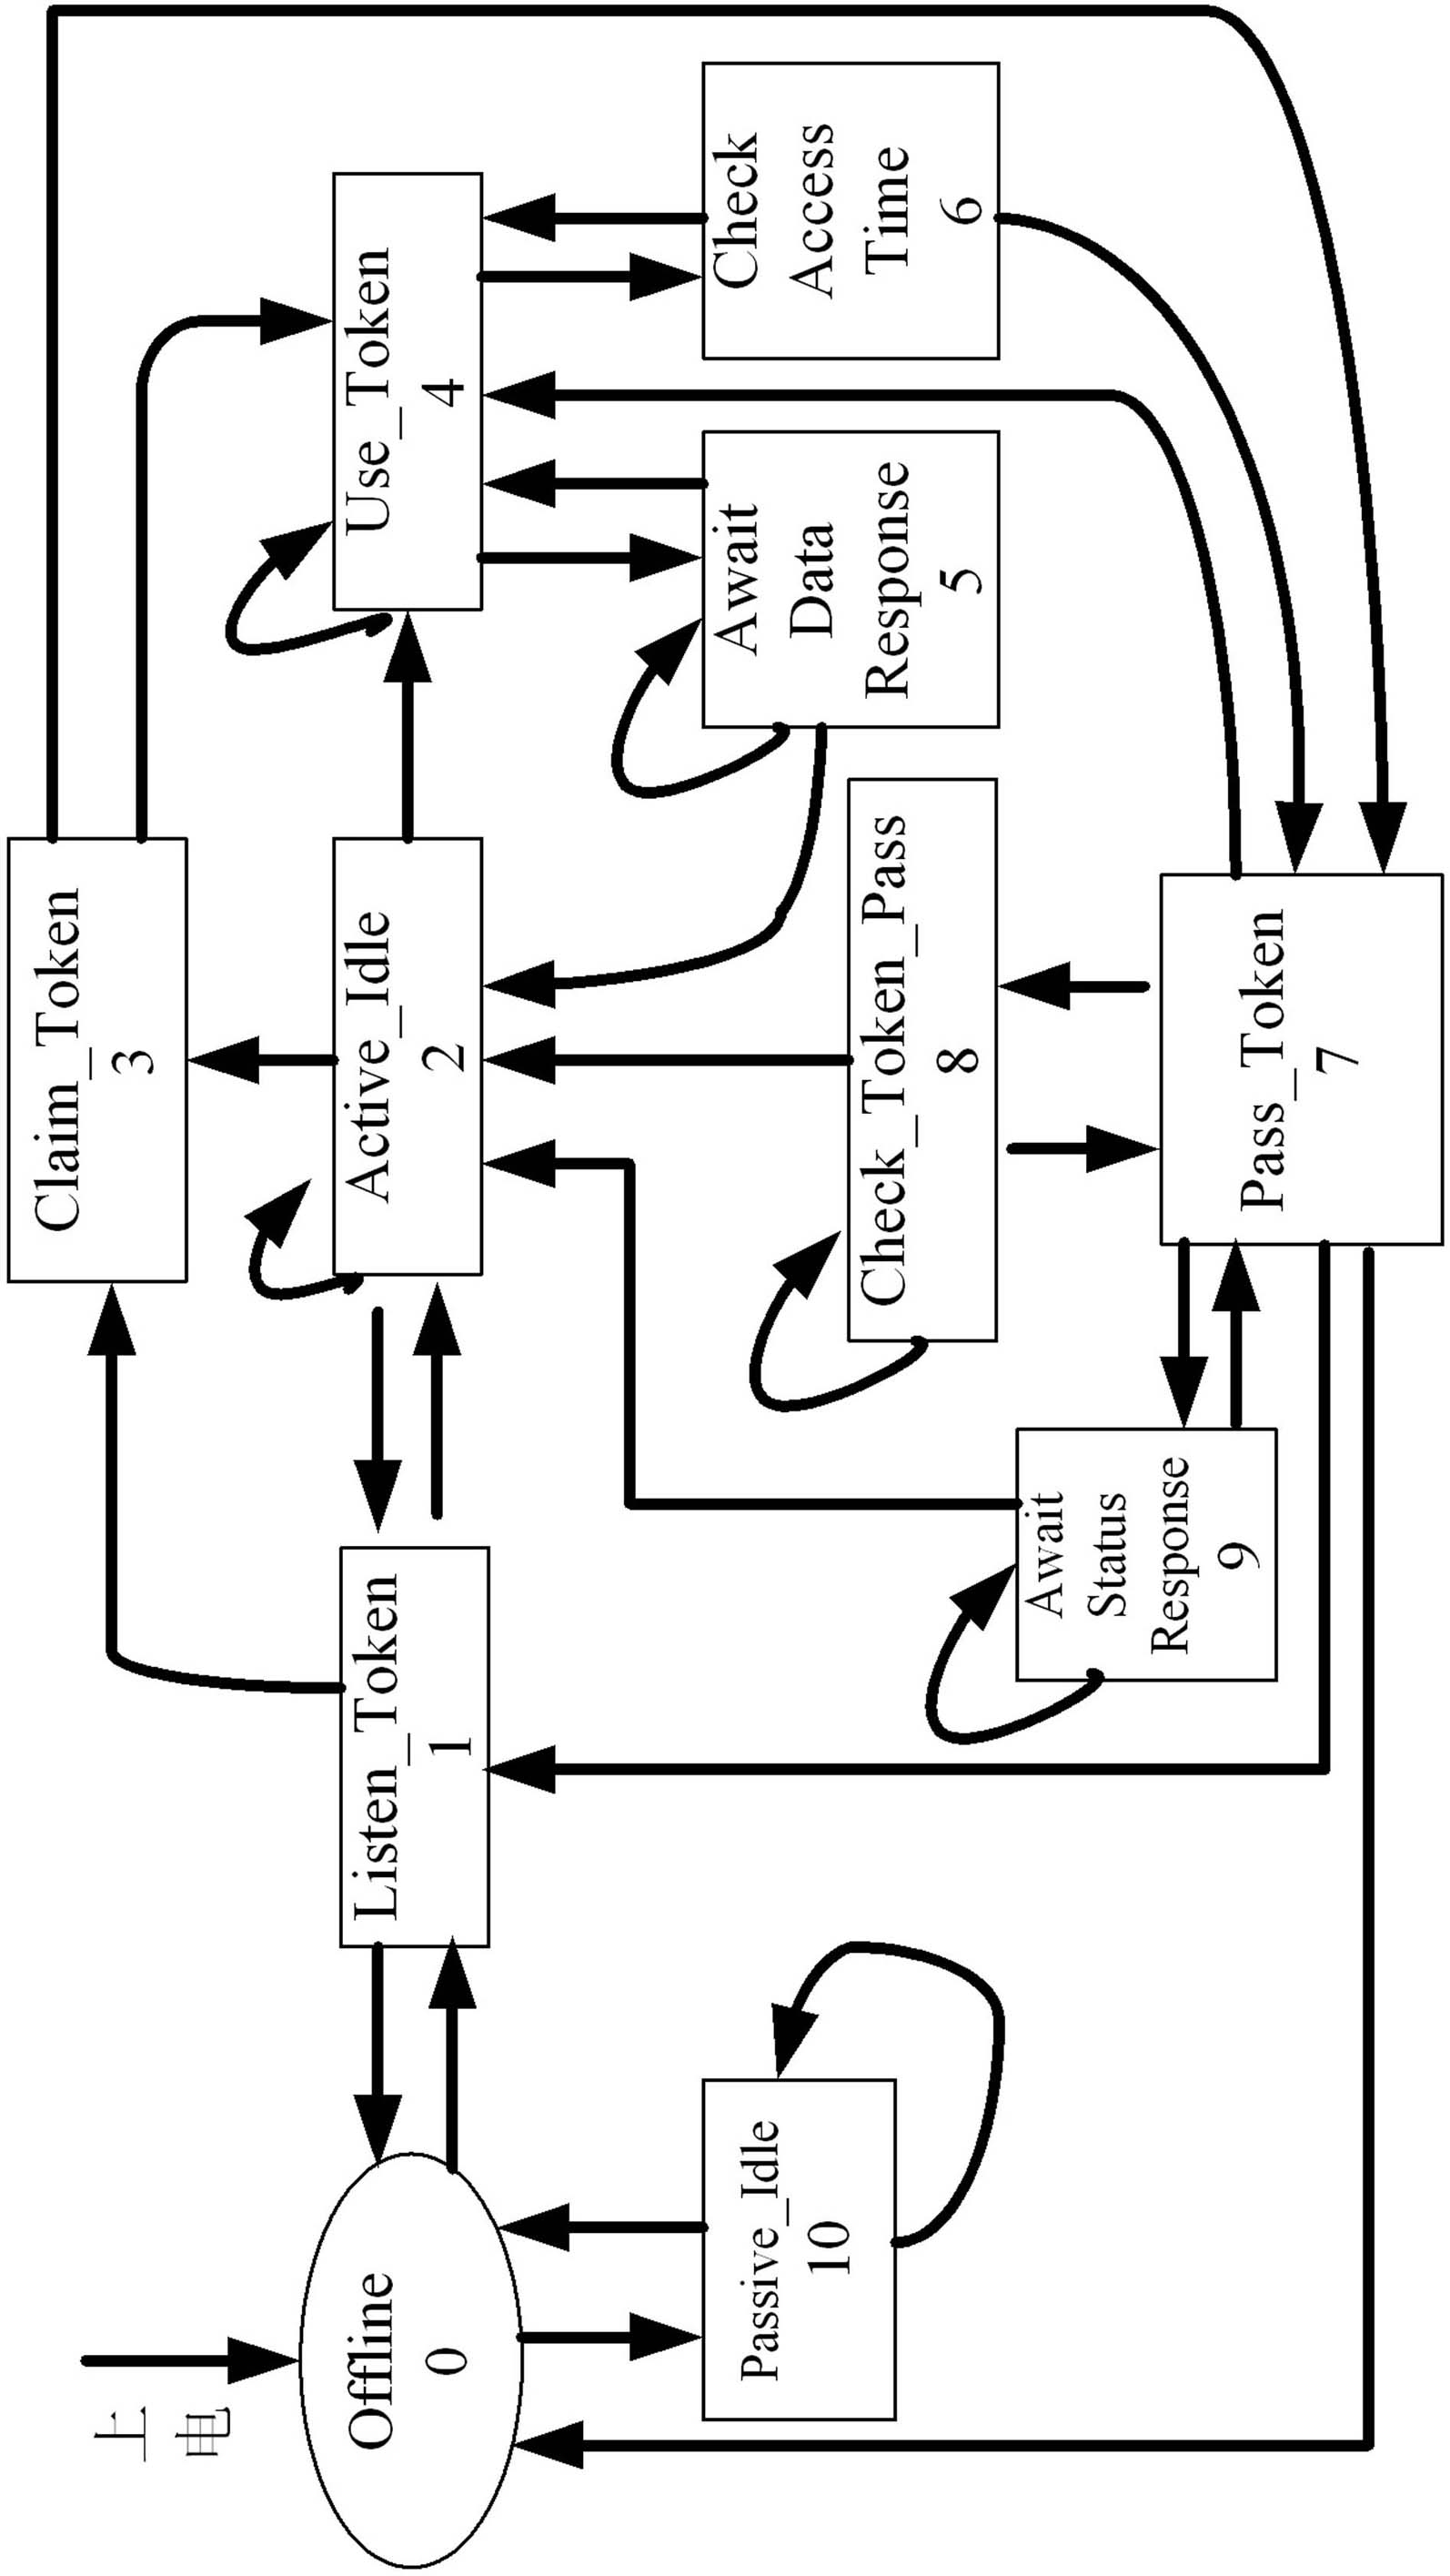 Protocol conversion device based on PROFIBUS-DP master station field bus